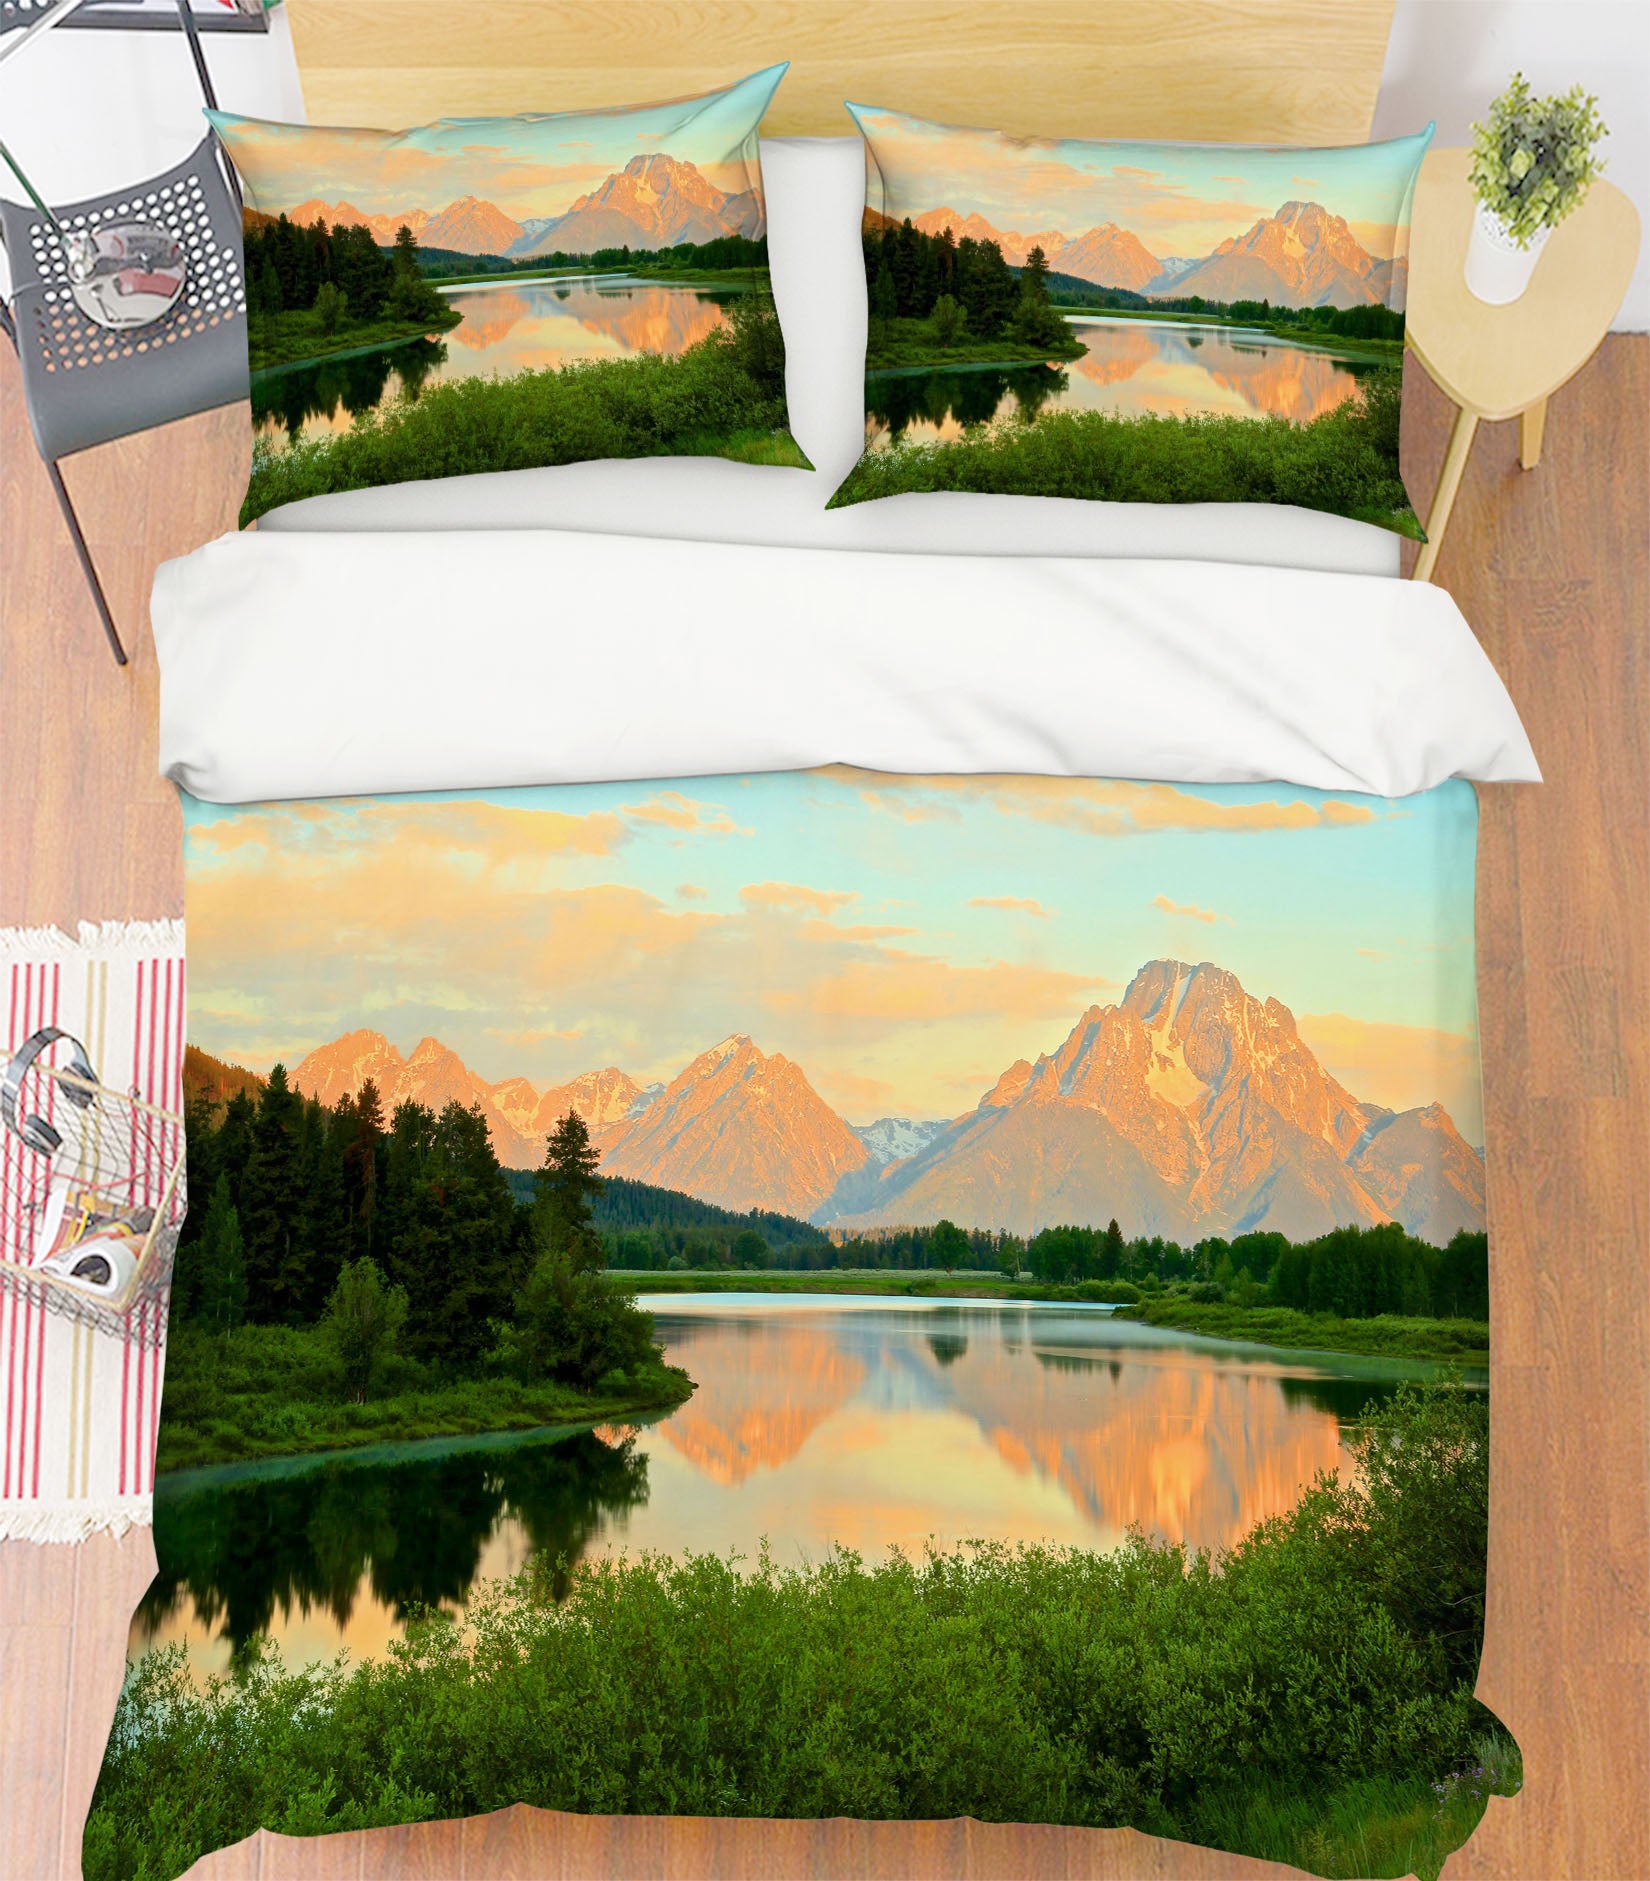 3D Mountain River Grass Tree 8682 Kathy Barefield Bedding Bed Pillowcases Quilt